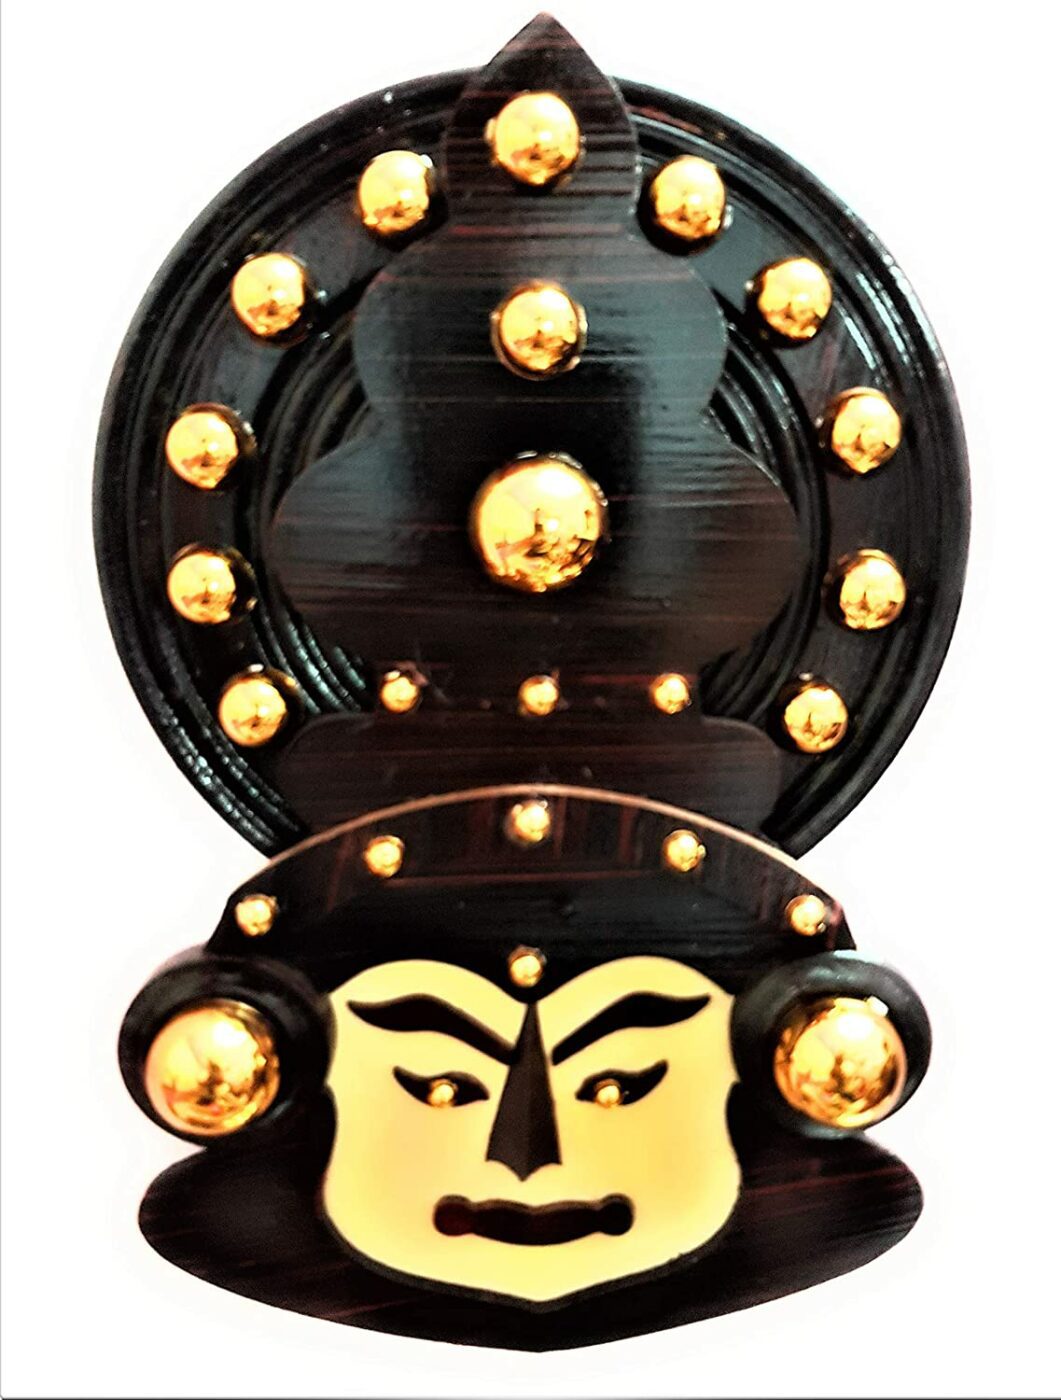 Hand crafted kathakali face